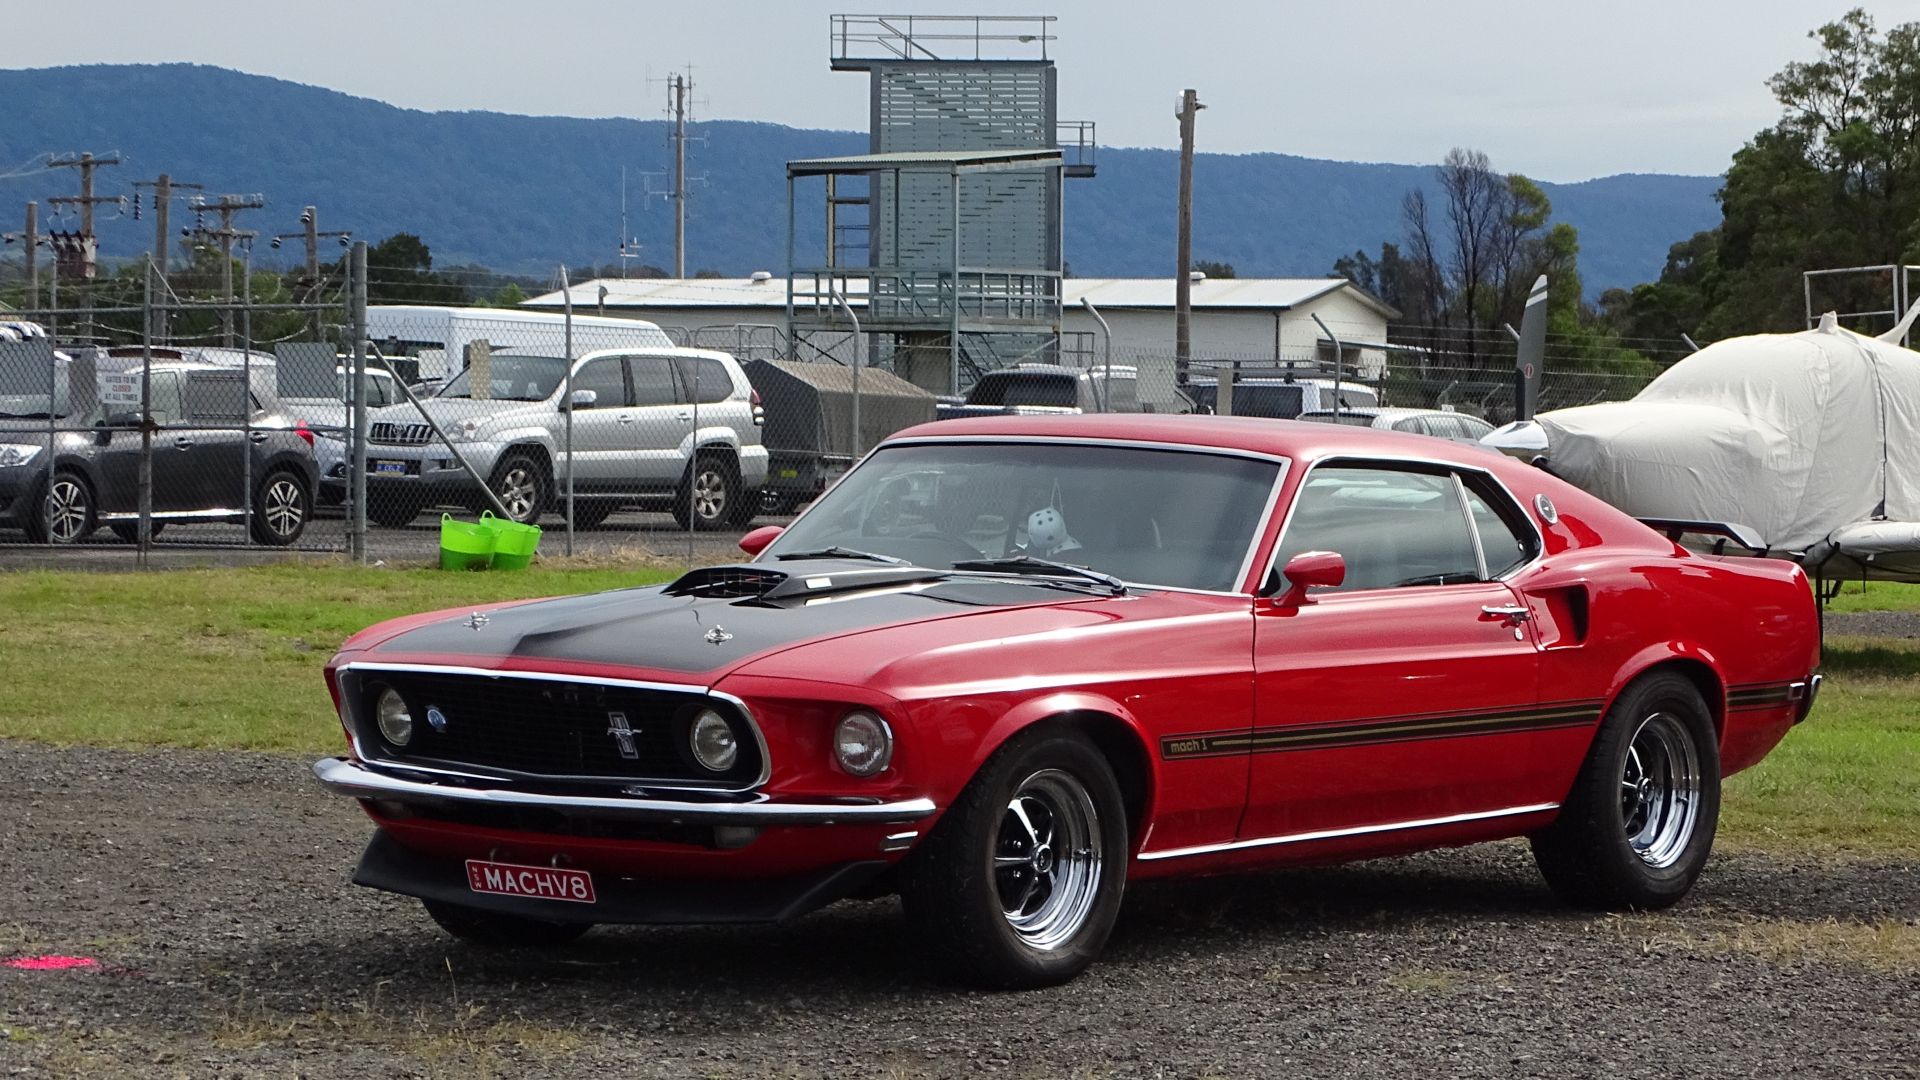 A Red Ford Mach 1 In A Parking Lot